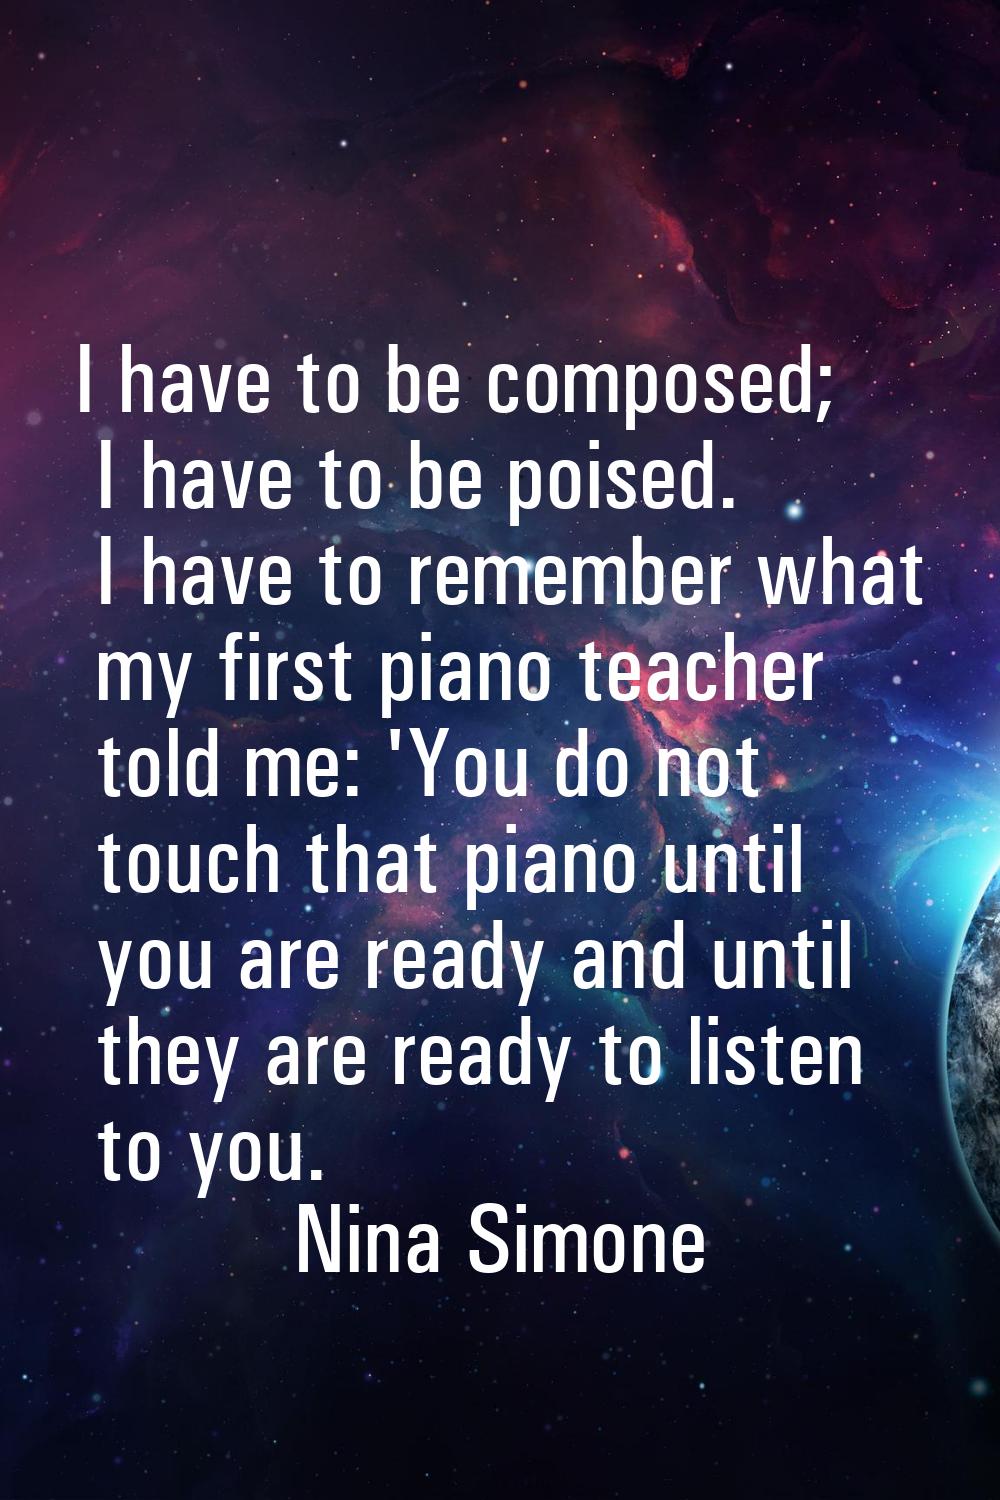 I have to be composed; I have to be poised. I have to remember what my first piano teacher told me: